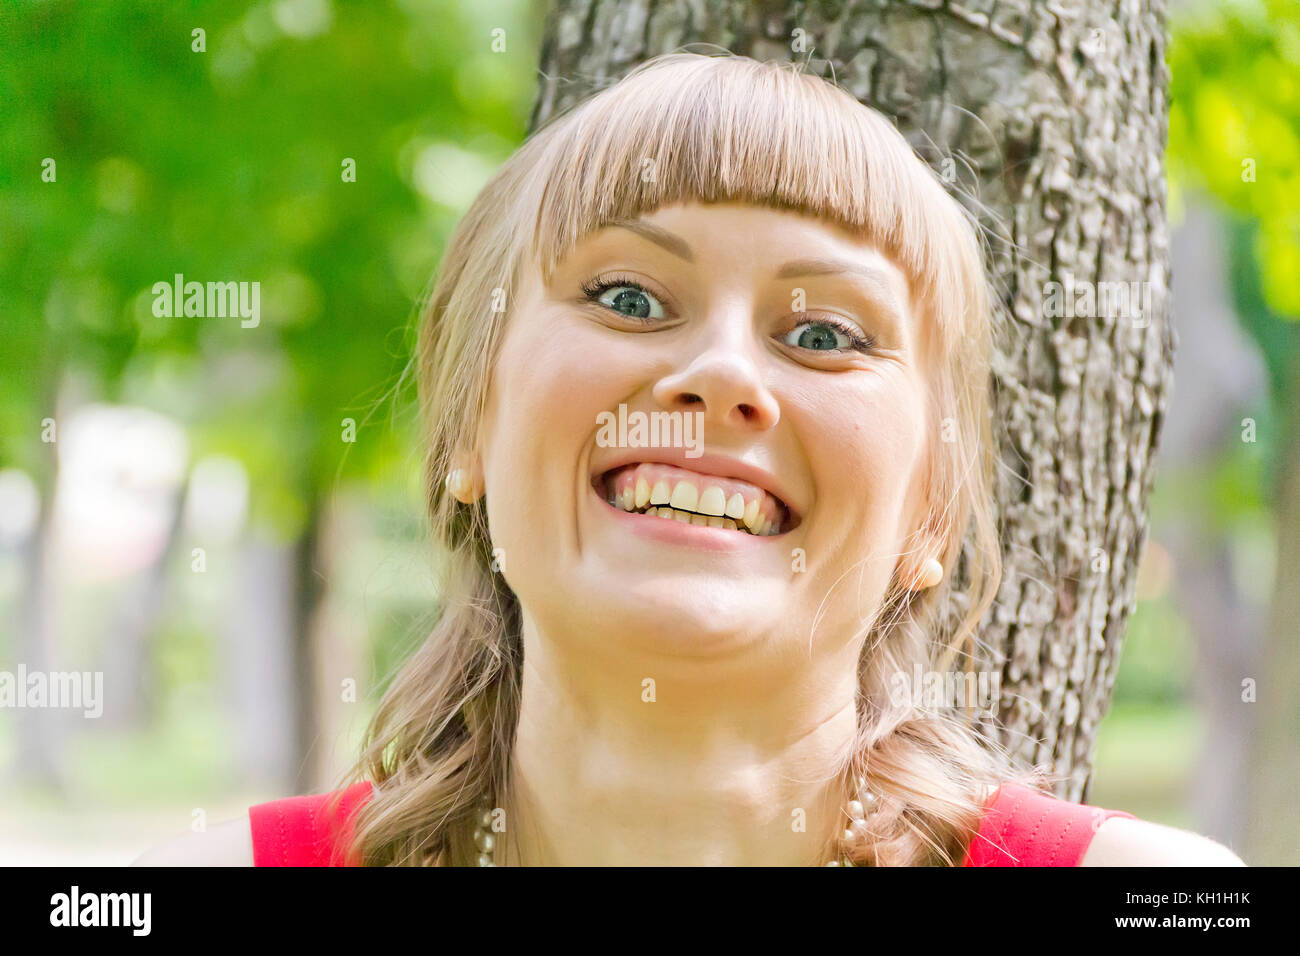 Shocked Girl with Bulging Wide-open Eyes and Open Mouth Pin Stock Photo -  Image of cool, human: 68704688